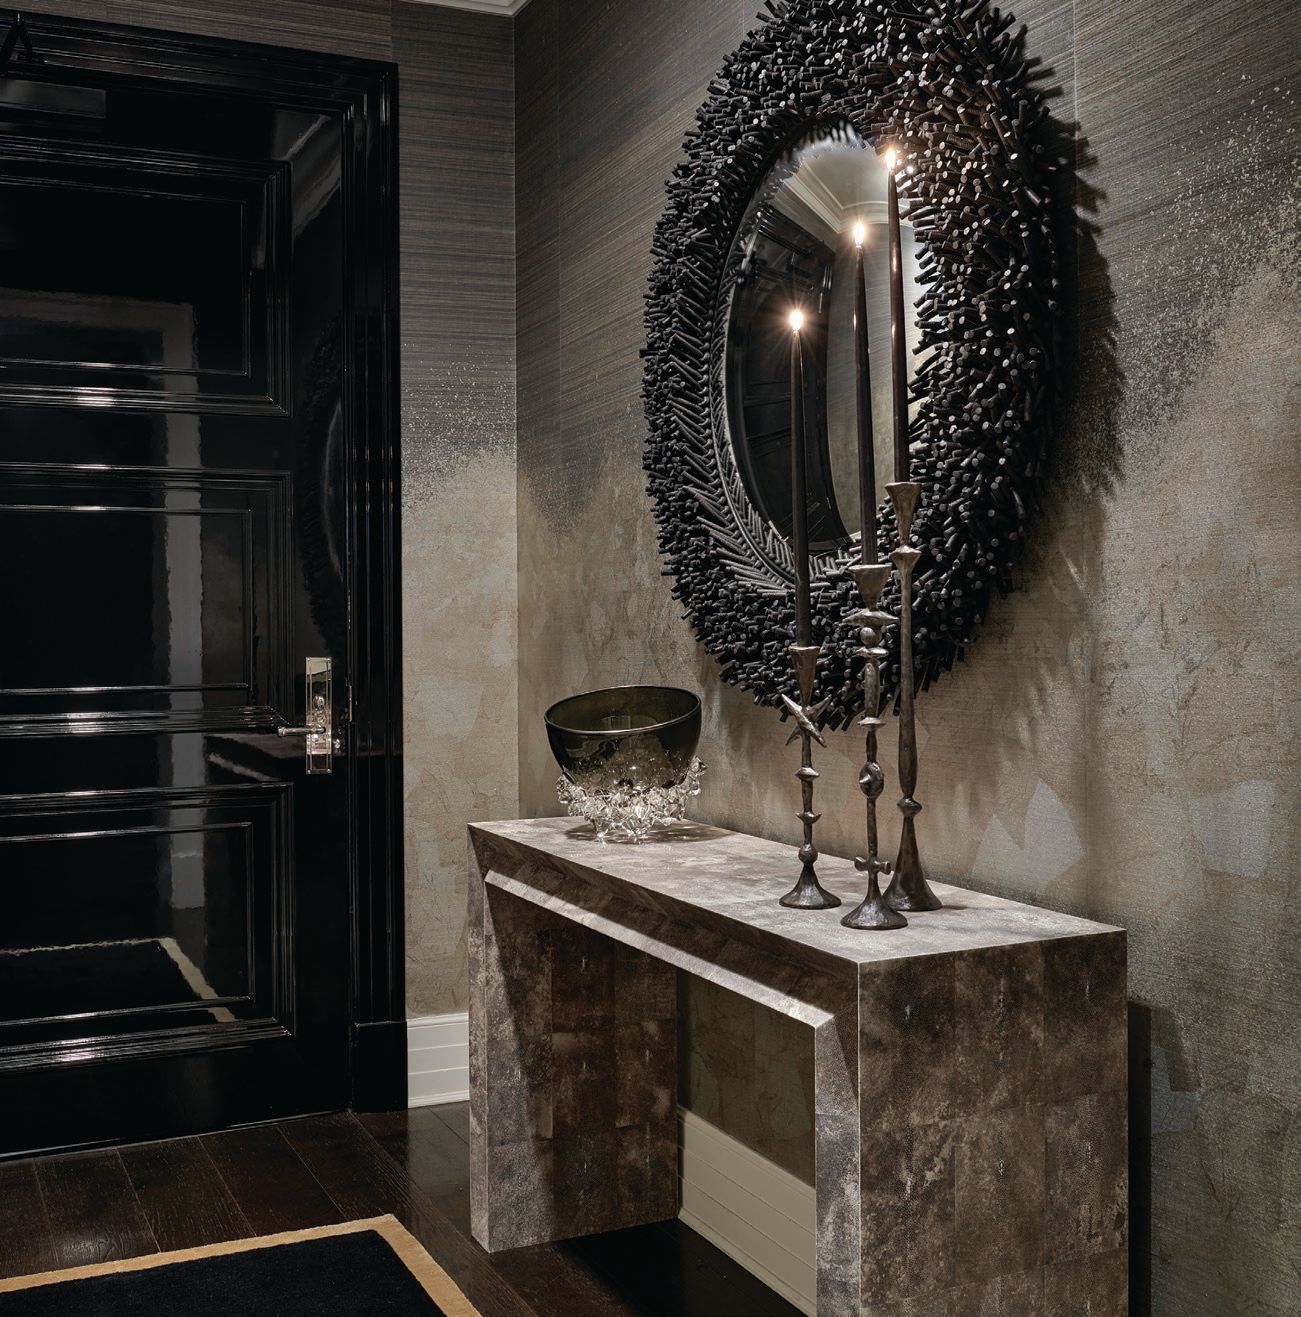 A black lacquer door, Phillip Jeffries Metallic Ombre wallpaper in Pewter on Shetland horsehair, and a Christian Astuguevieille black rope mirror add up
to a seriously dramatic foyer.  PHOTOGRAPHED BY TONY SOLURI